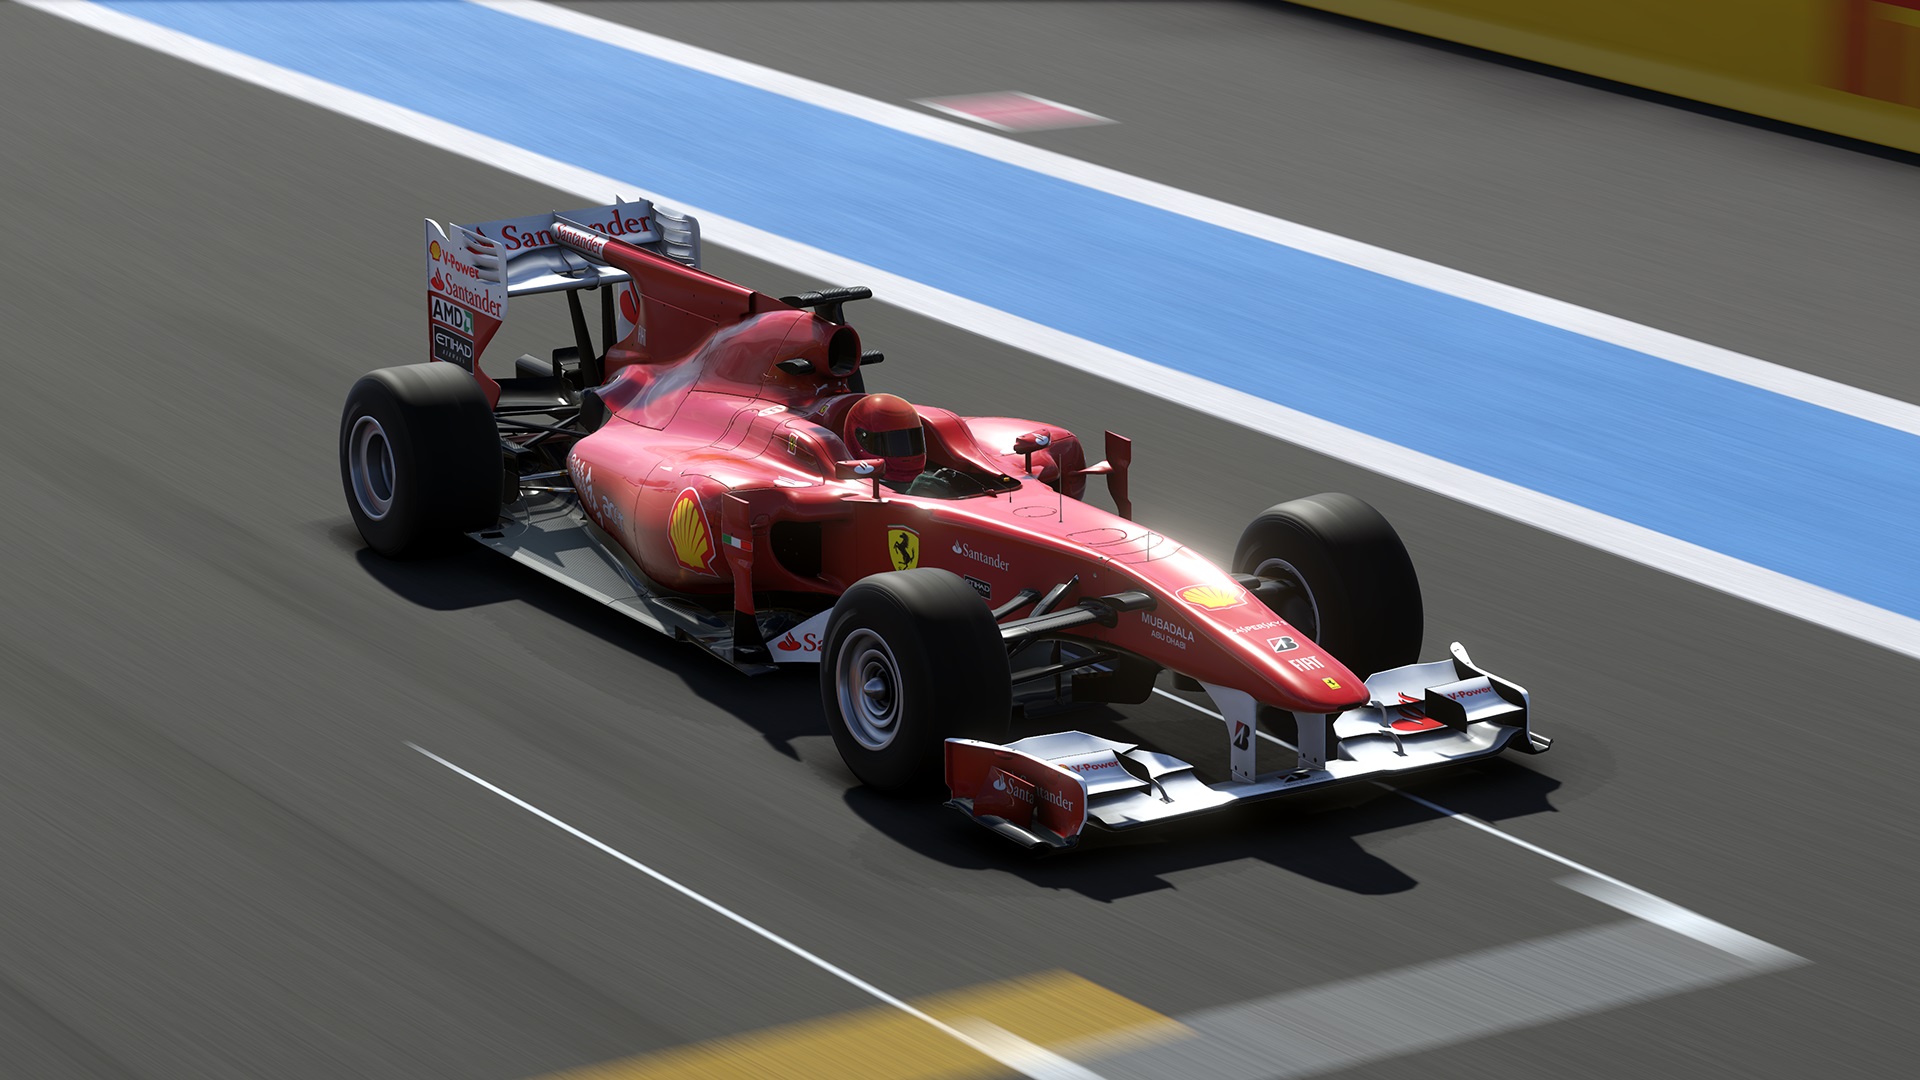 Alain Prost, Ayrton Senna, Codemasters, Driving, F1 2019, F1 2019 Legends Edition Senna & Prost Review, F1 2019 Review, multiplayer, Racing, Rating 8/10, simulation, Sports, Xbox One, Xbox One Review